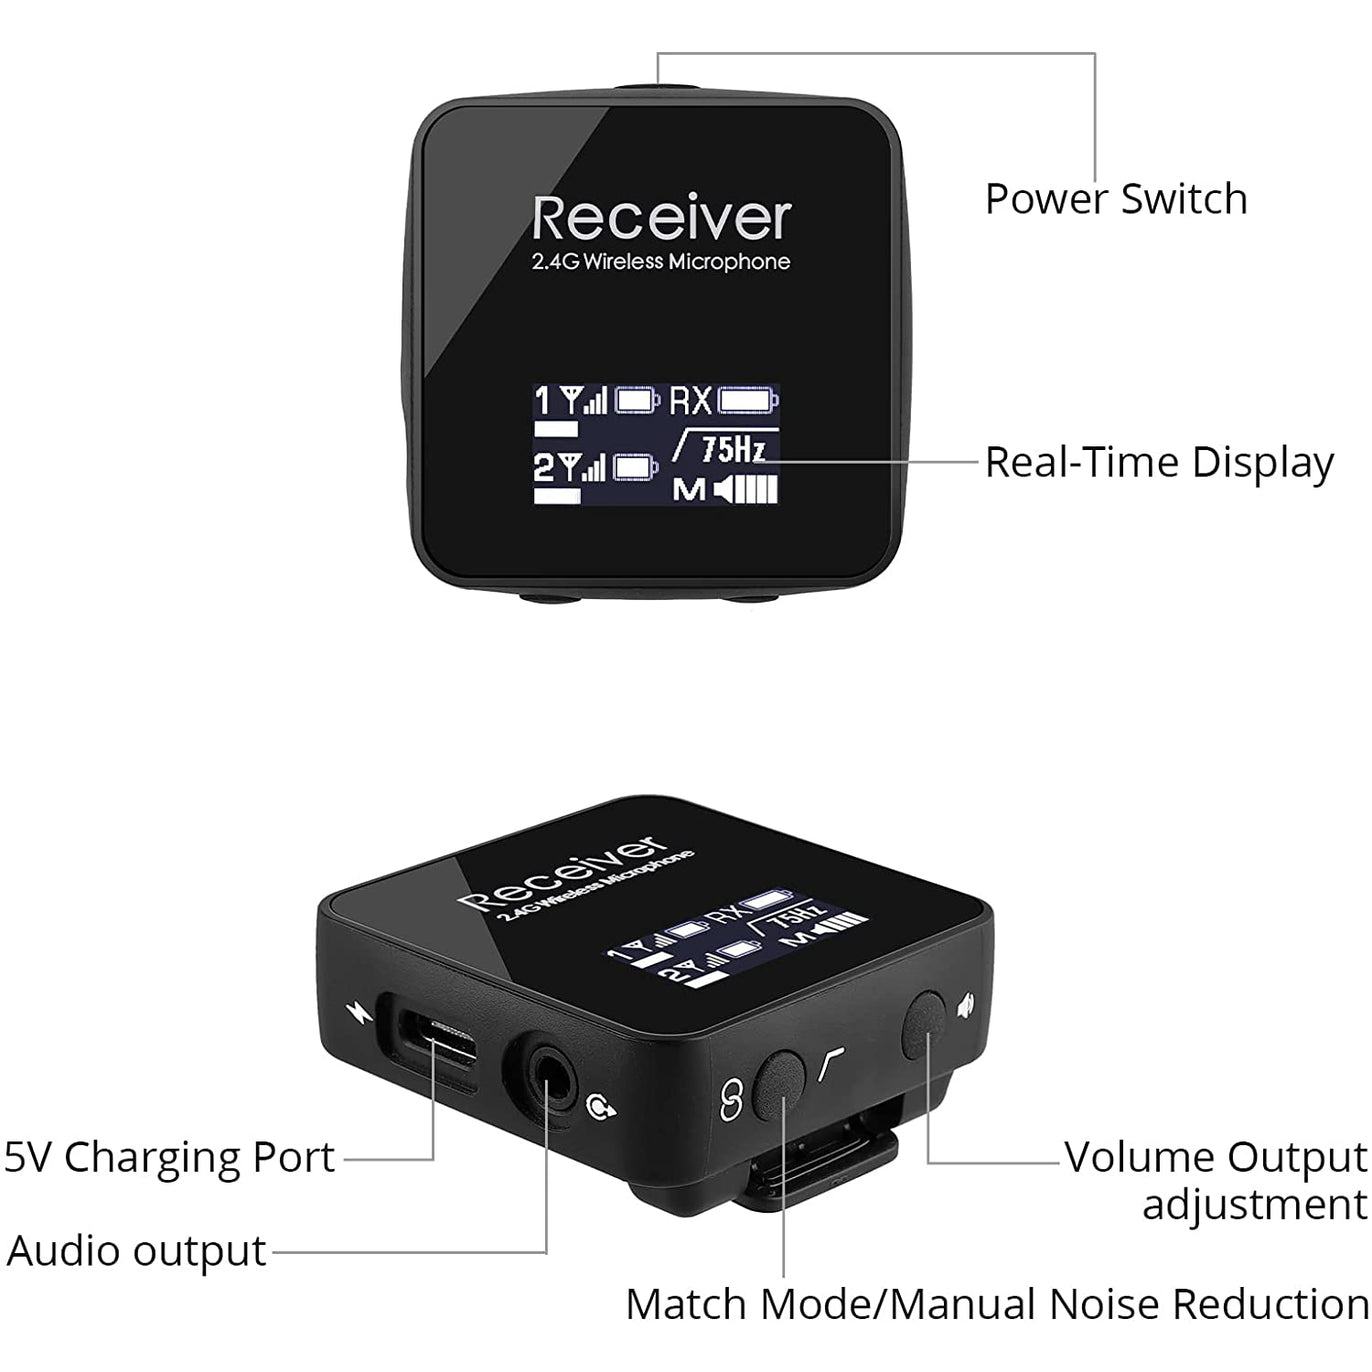 PROZOR 2.4GHz Wireless Lavalier Microphone System with Dual Transmitter & 1 Receiver Kit